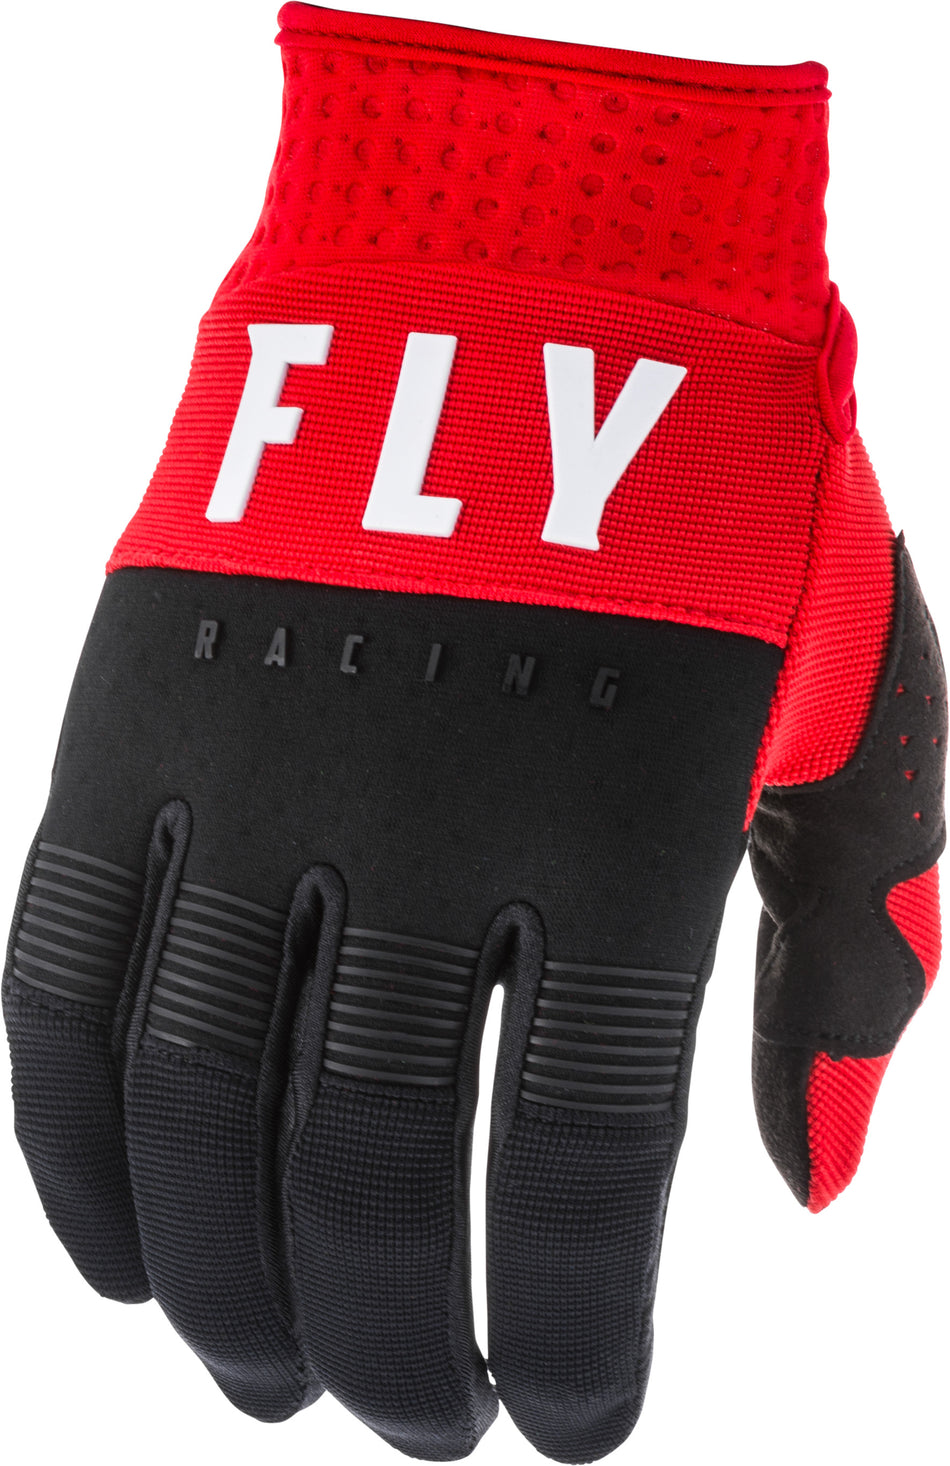 FLY RACING F-16 Gloves Red/Black/White Sz 02 373-91302